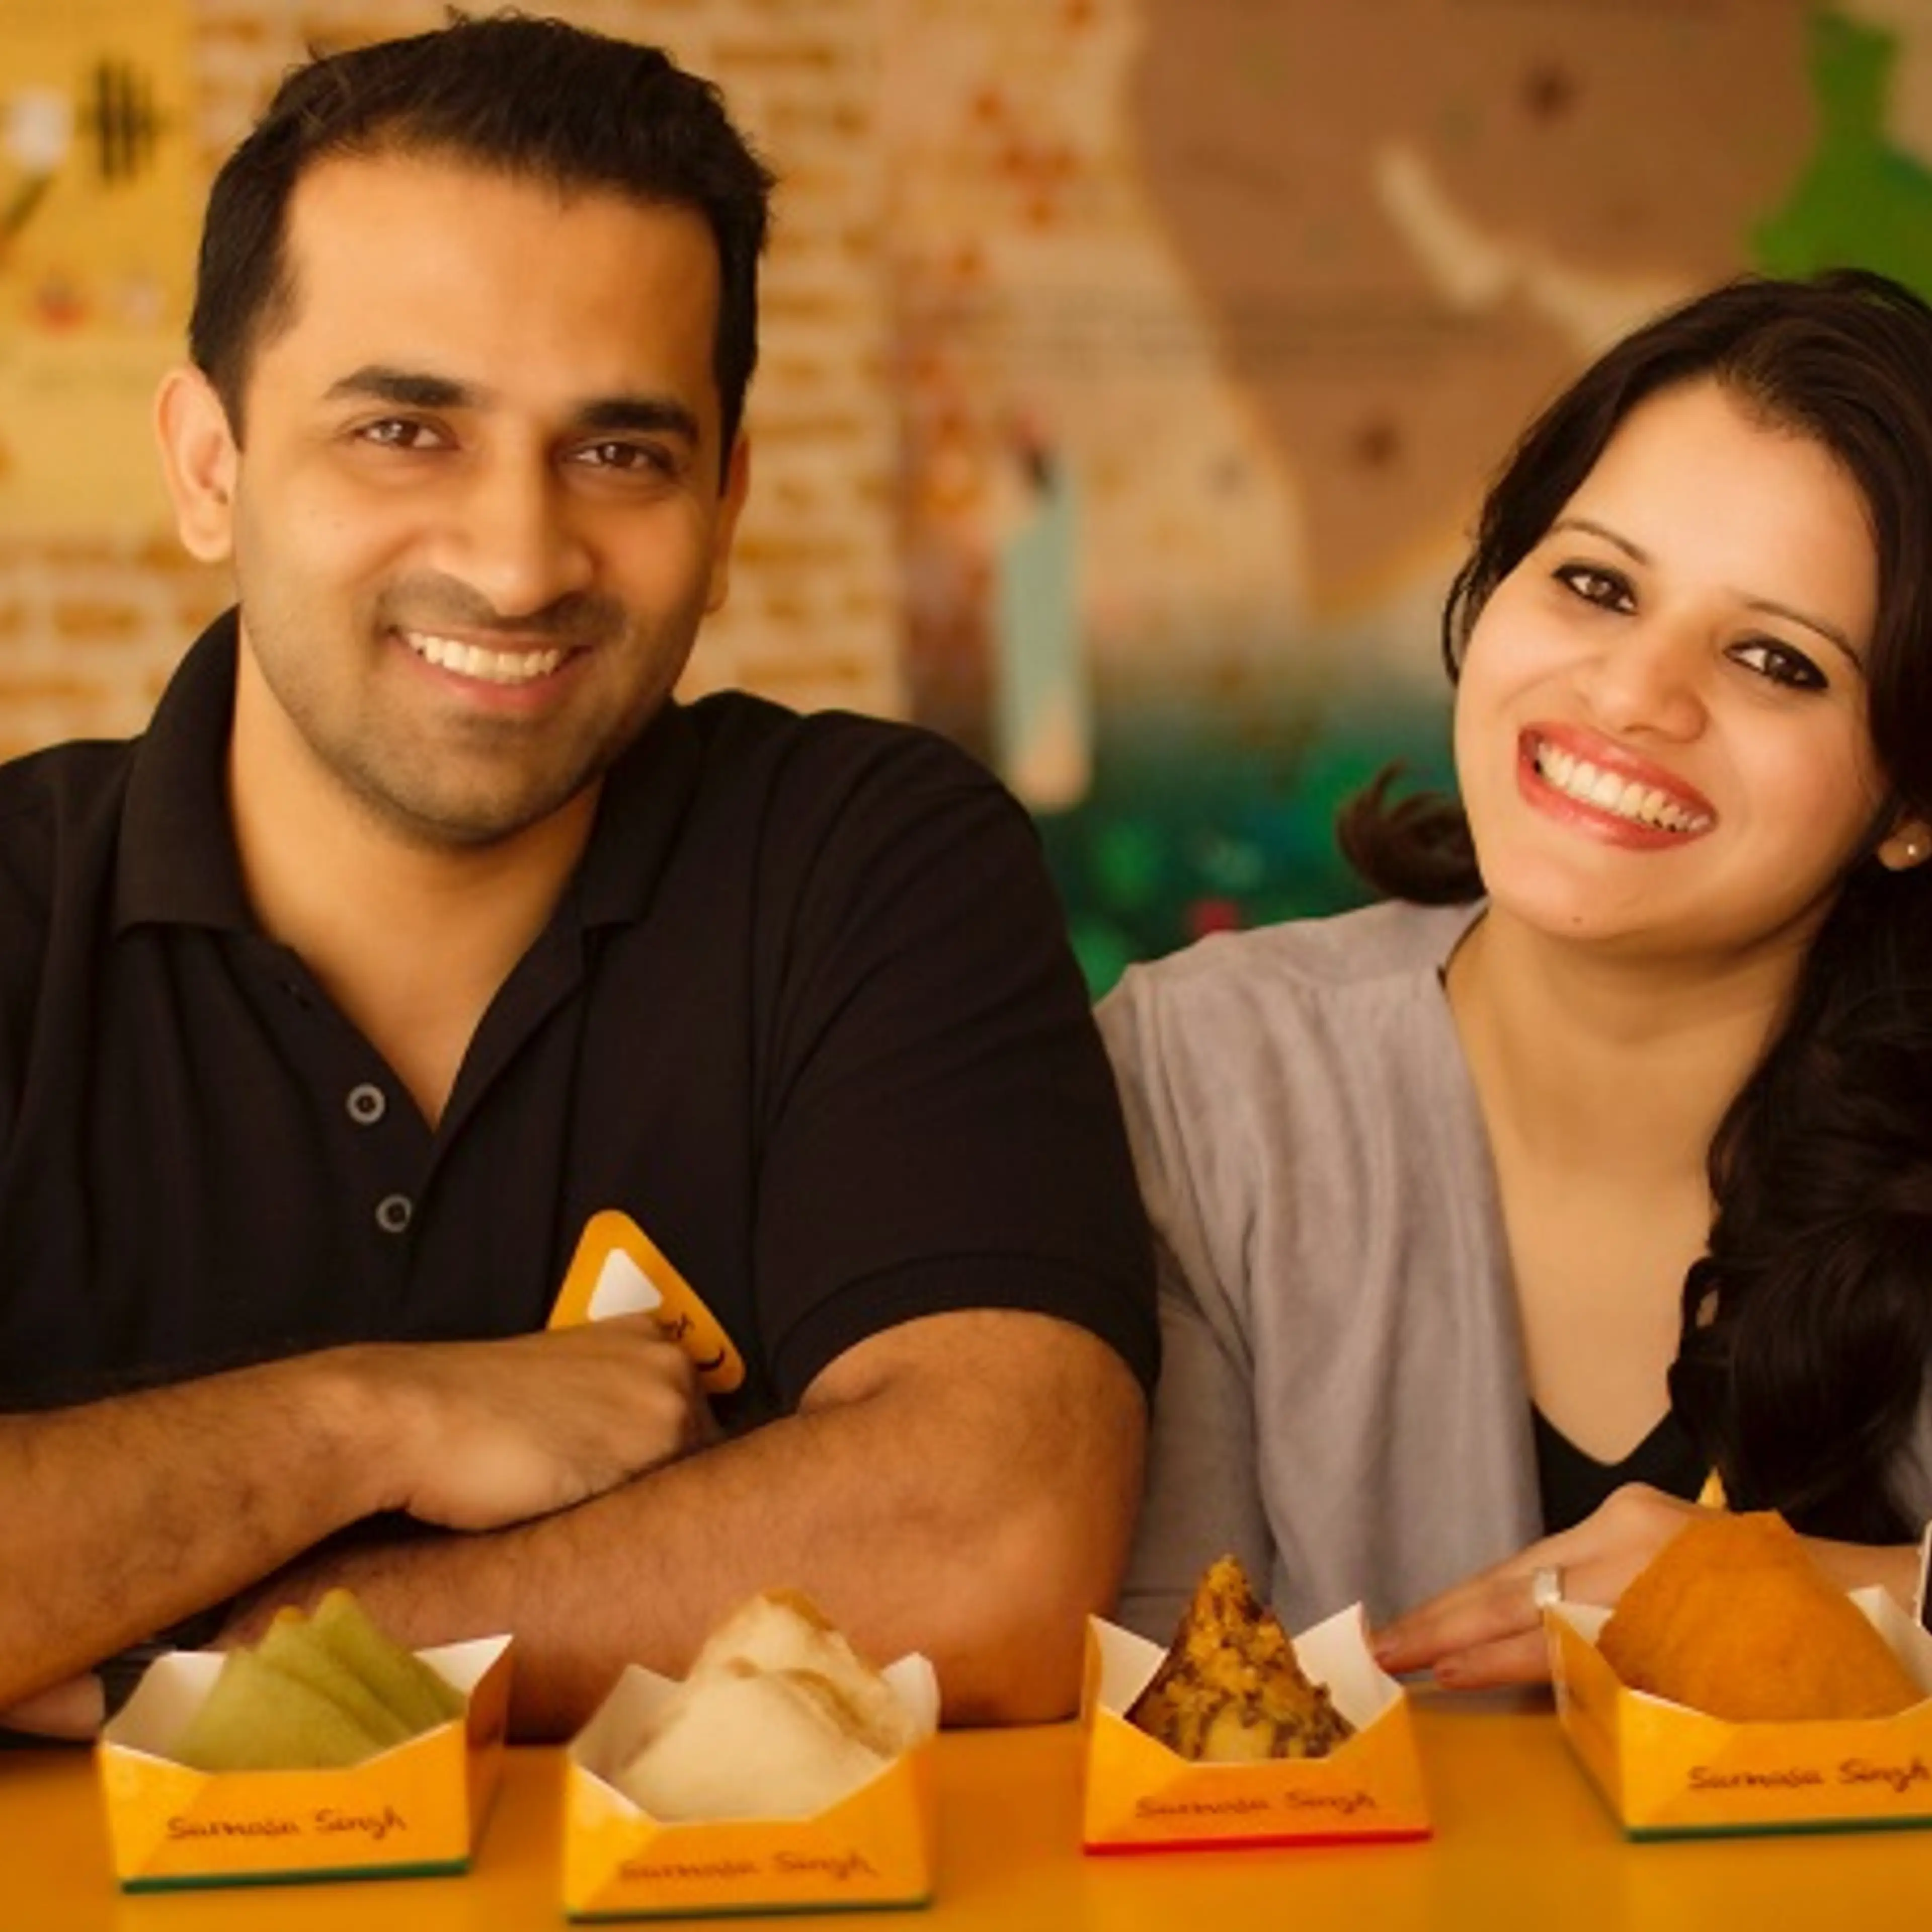 Meet the husband-wife duo who sold their flat to build their dream business, Samosa Singh